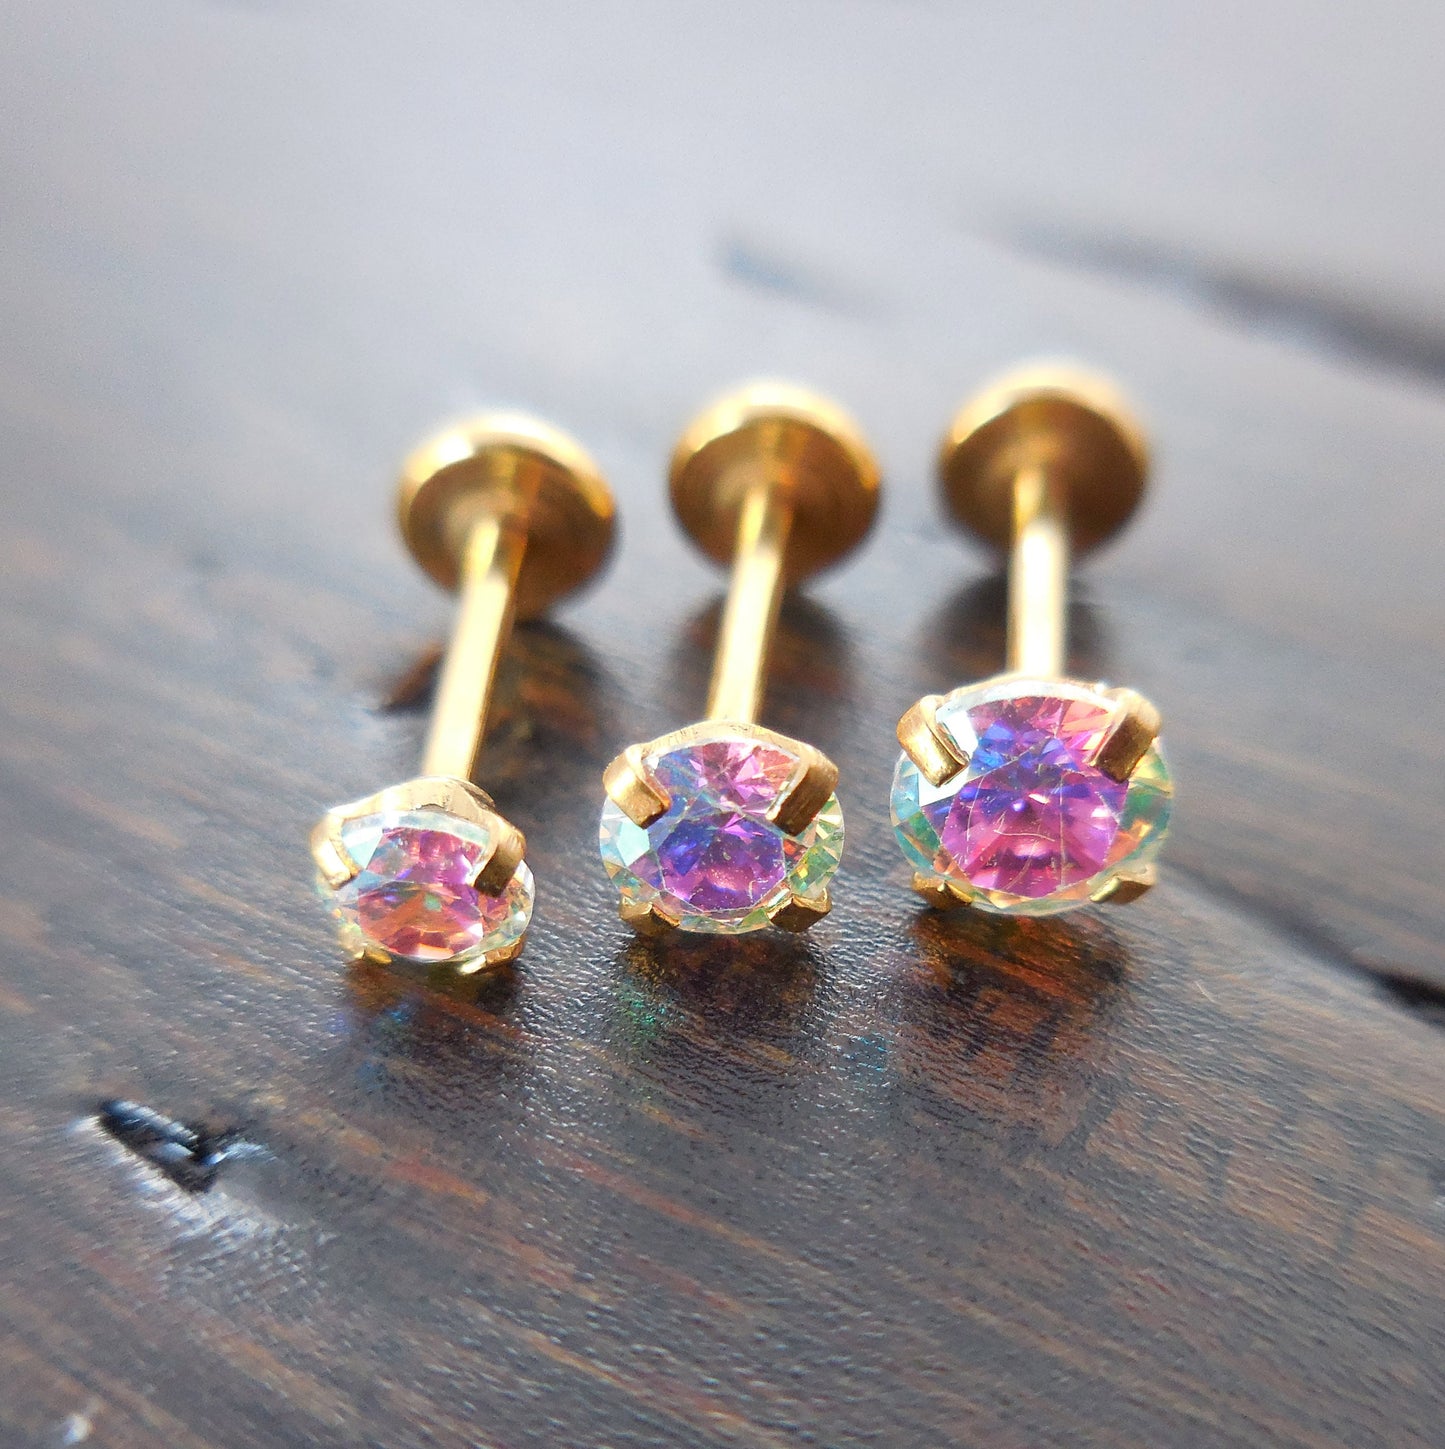 20g 2-4mm Labret Thread Less Triple Forward Helix Prong Set Tragus AB Crystal Push Pin 6mm-8mm Nose Ring Cartilage Earrings Gold Tone